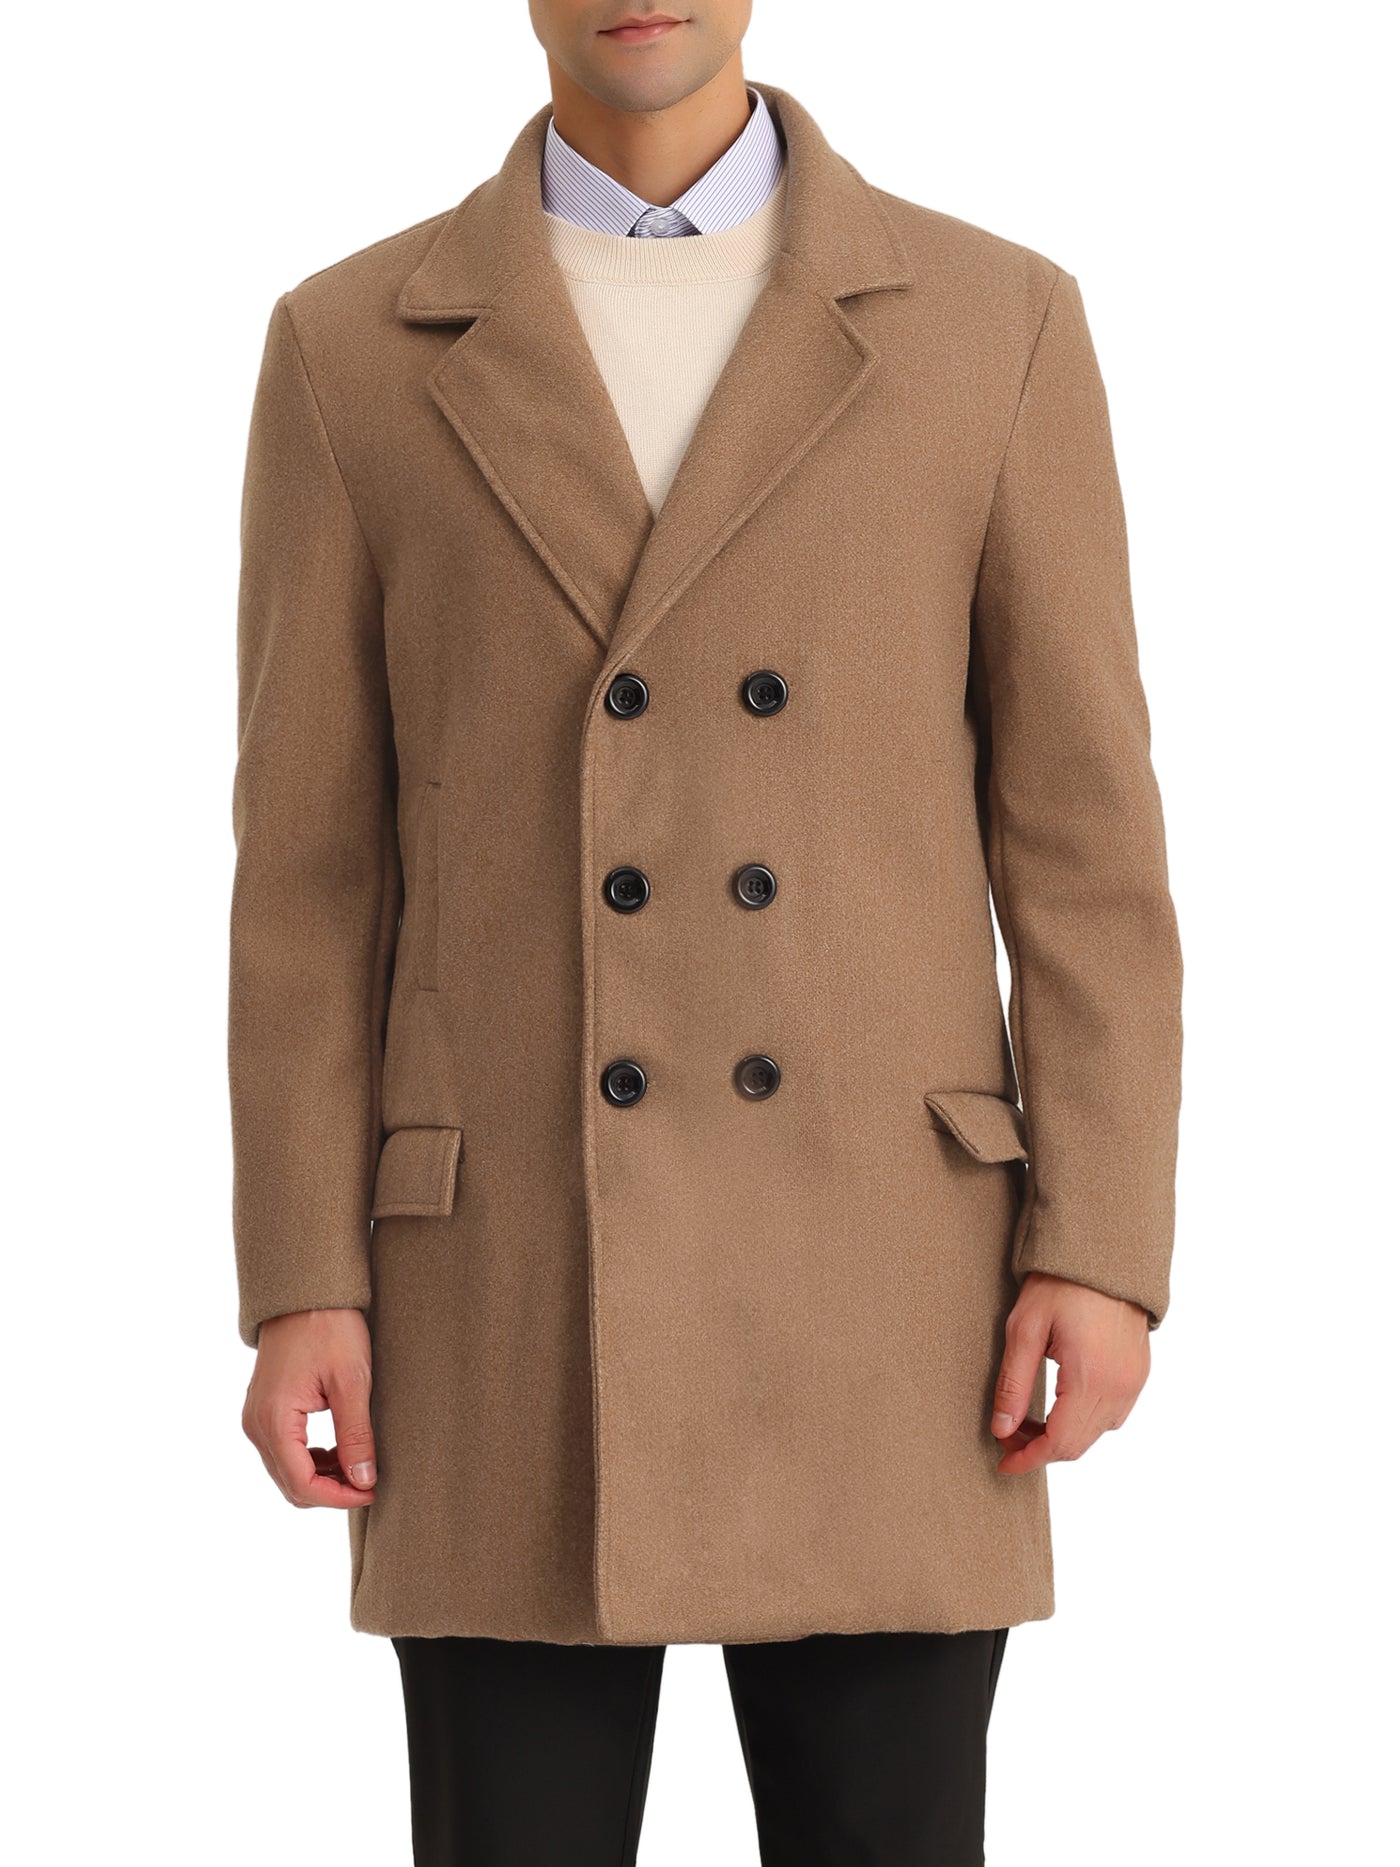 Bublédon Men's Winter Overcoat Double Breasted Notched Lapel Mid-Length Pea Coat